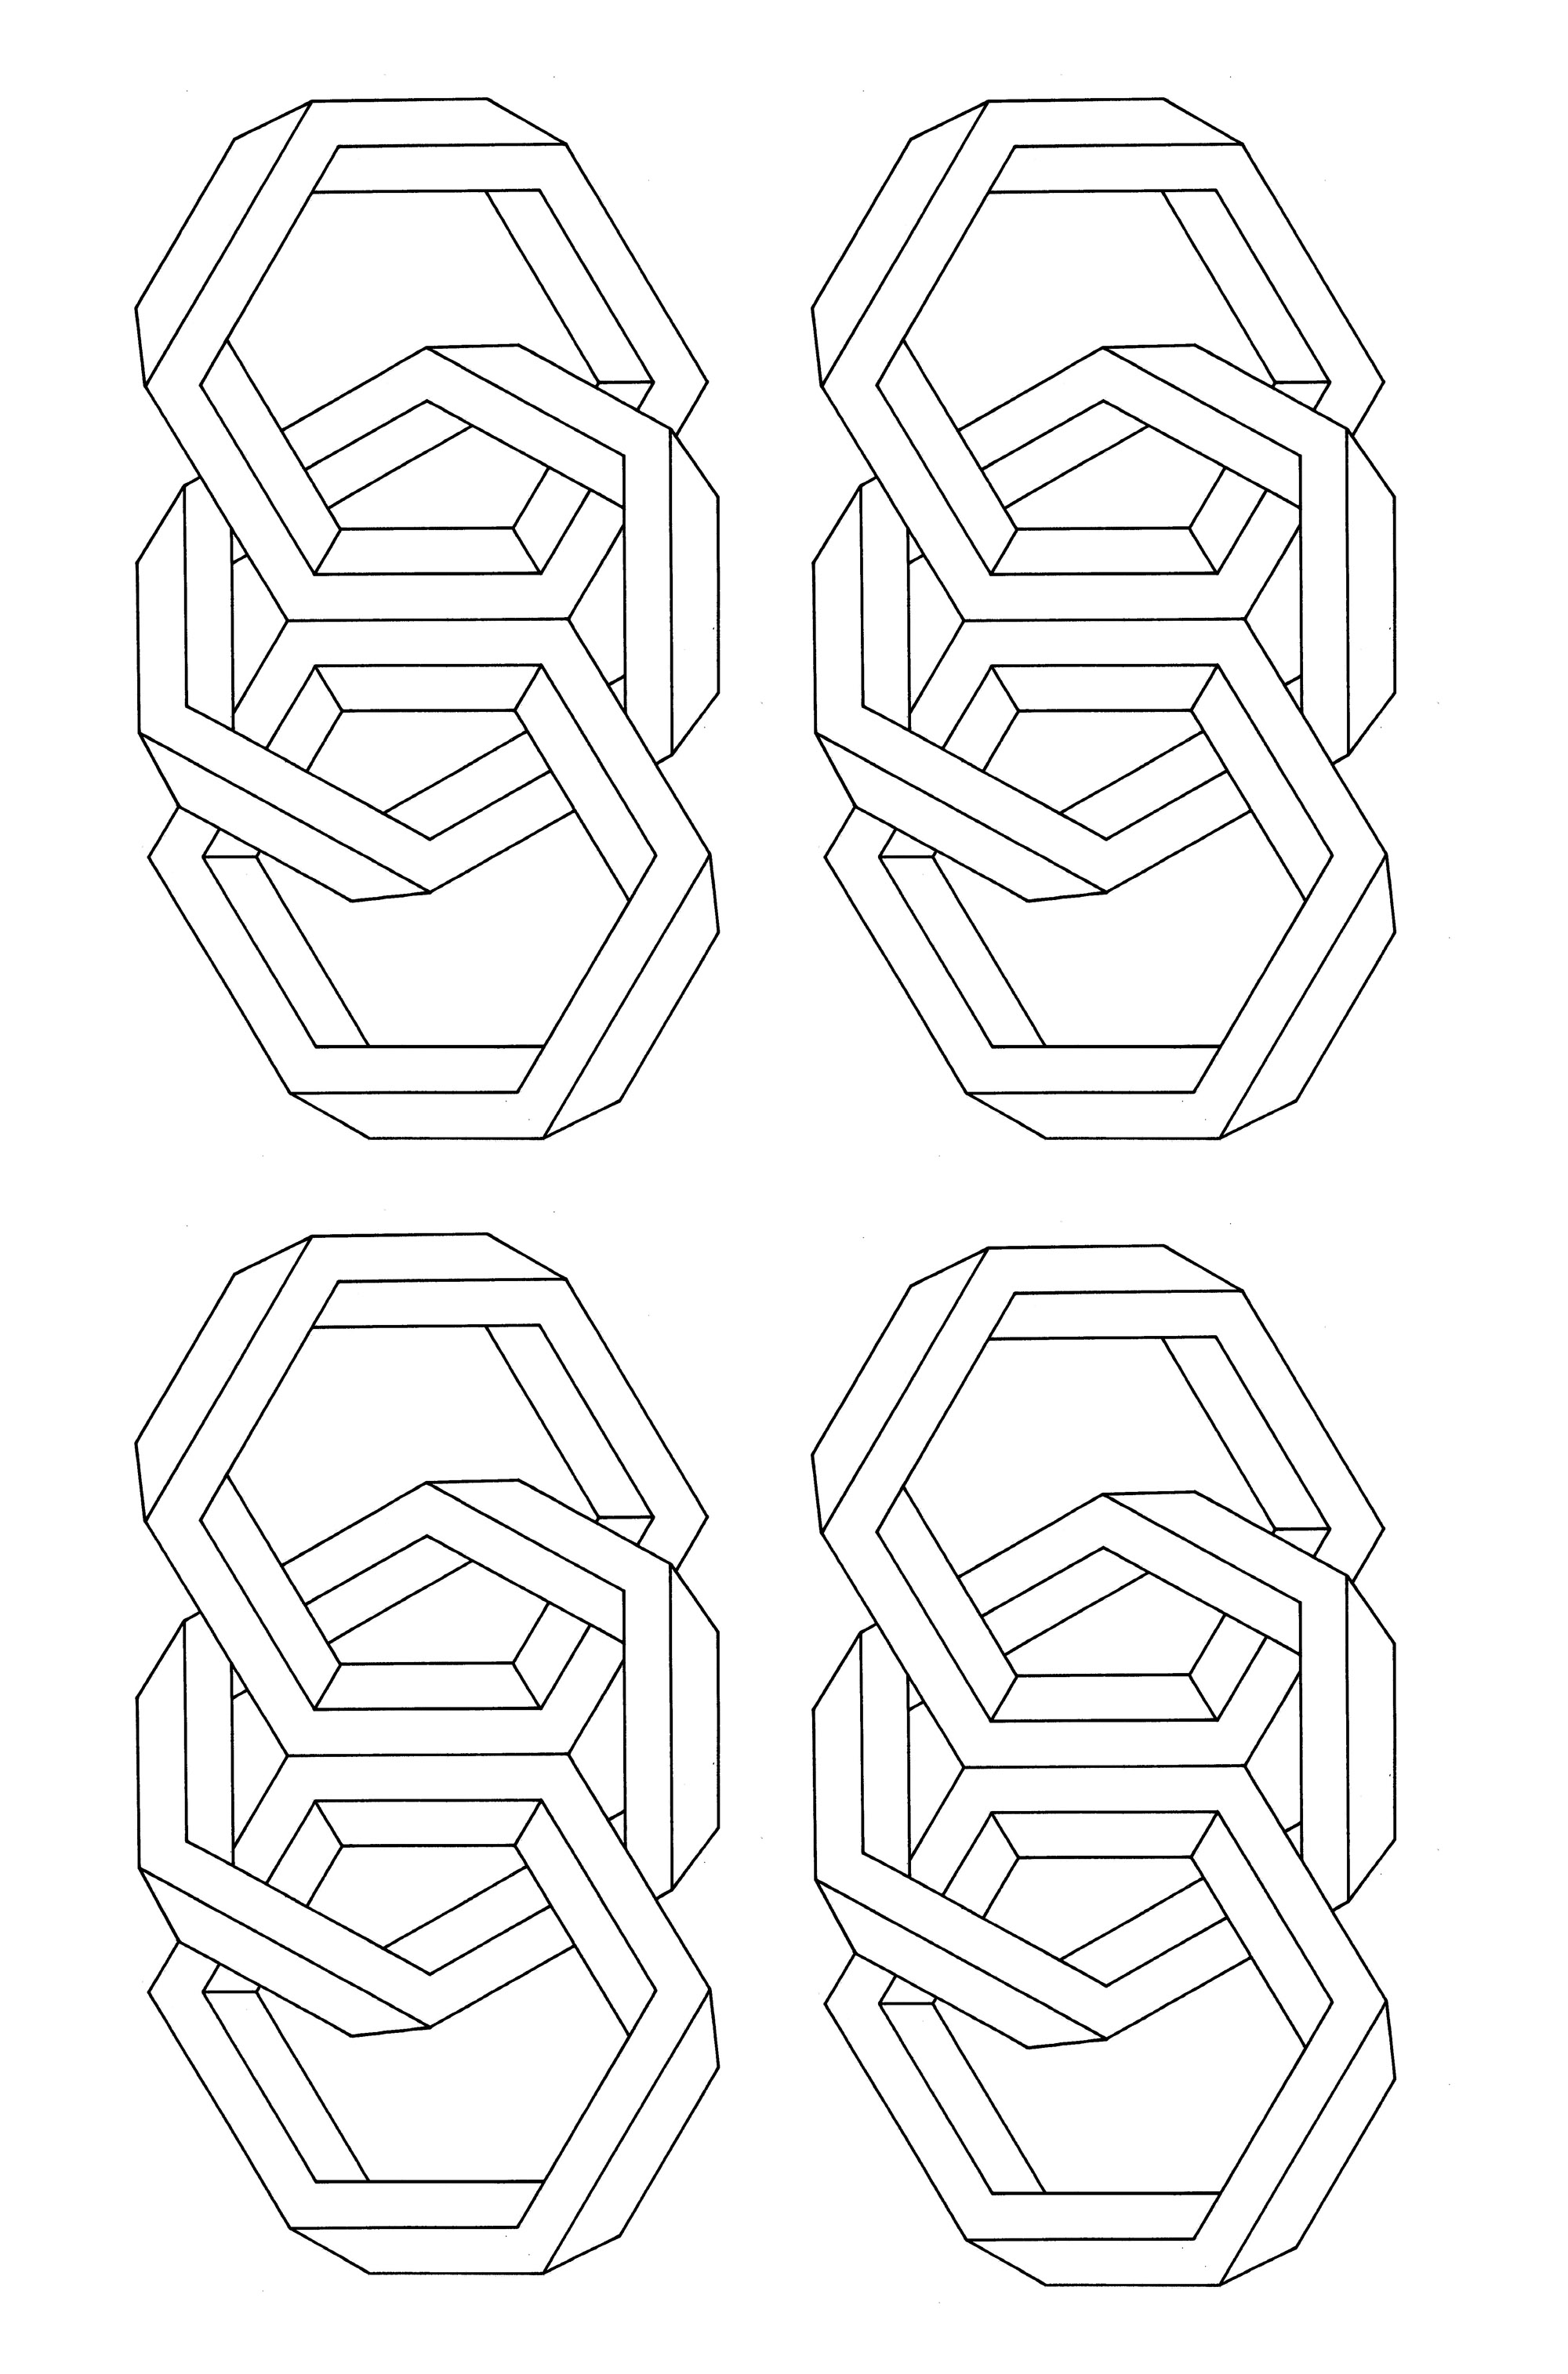 Simple coloring page with few forms with an impression of relief